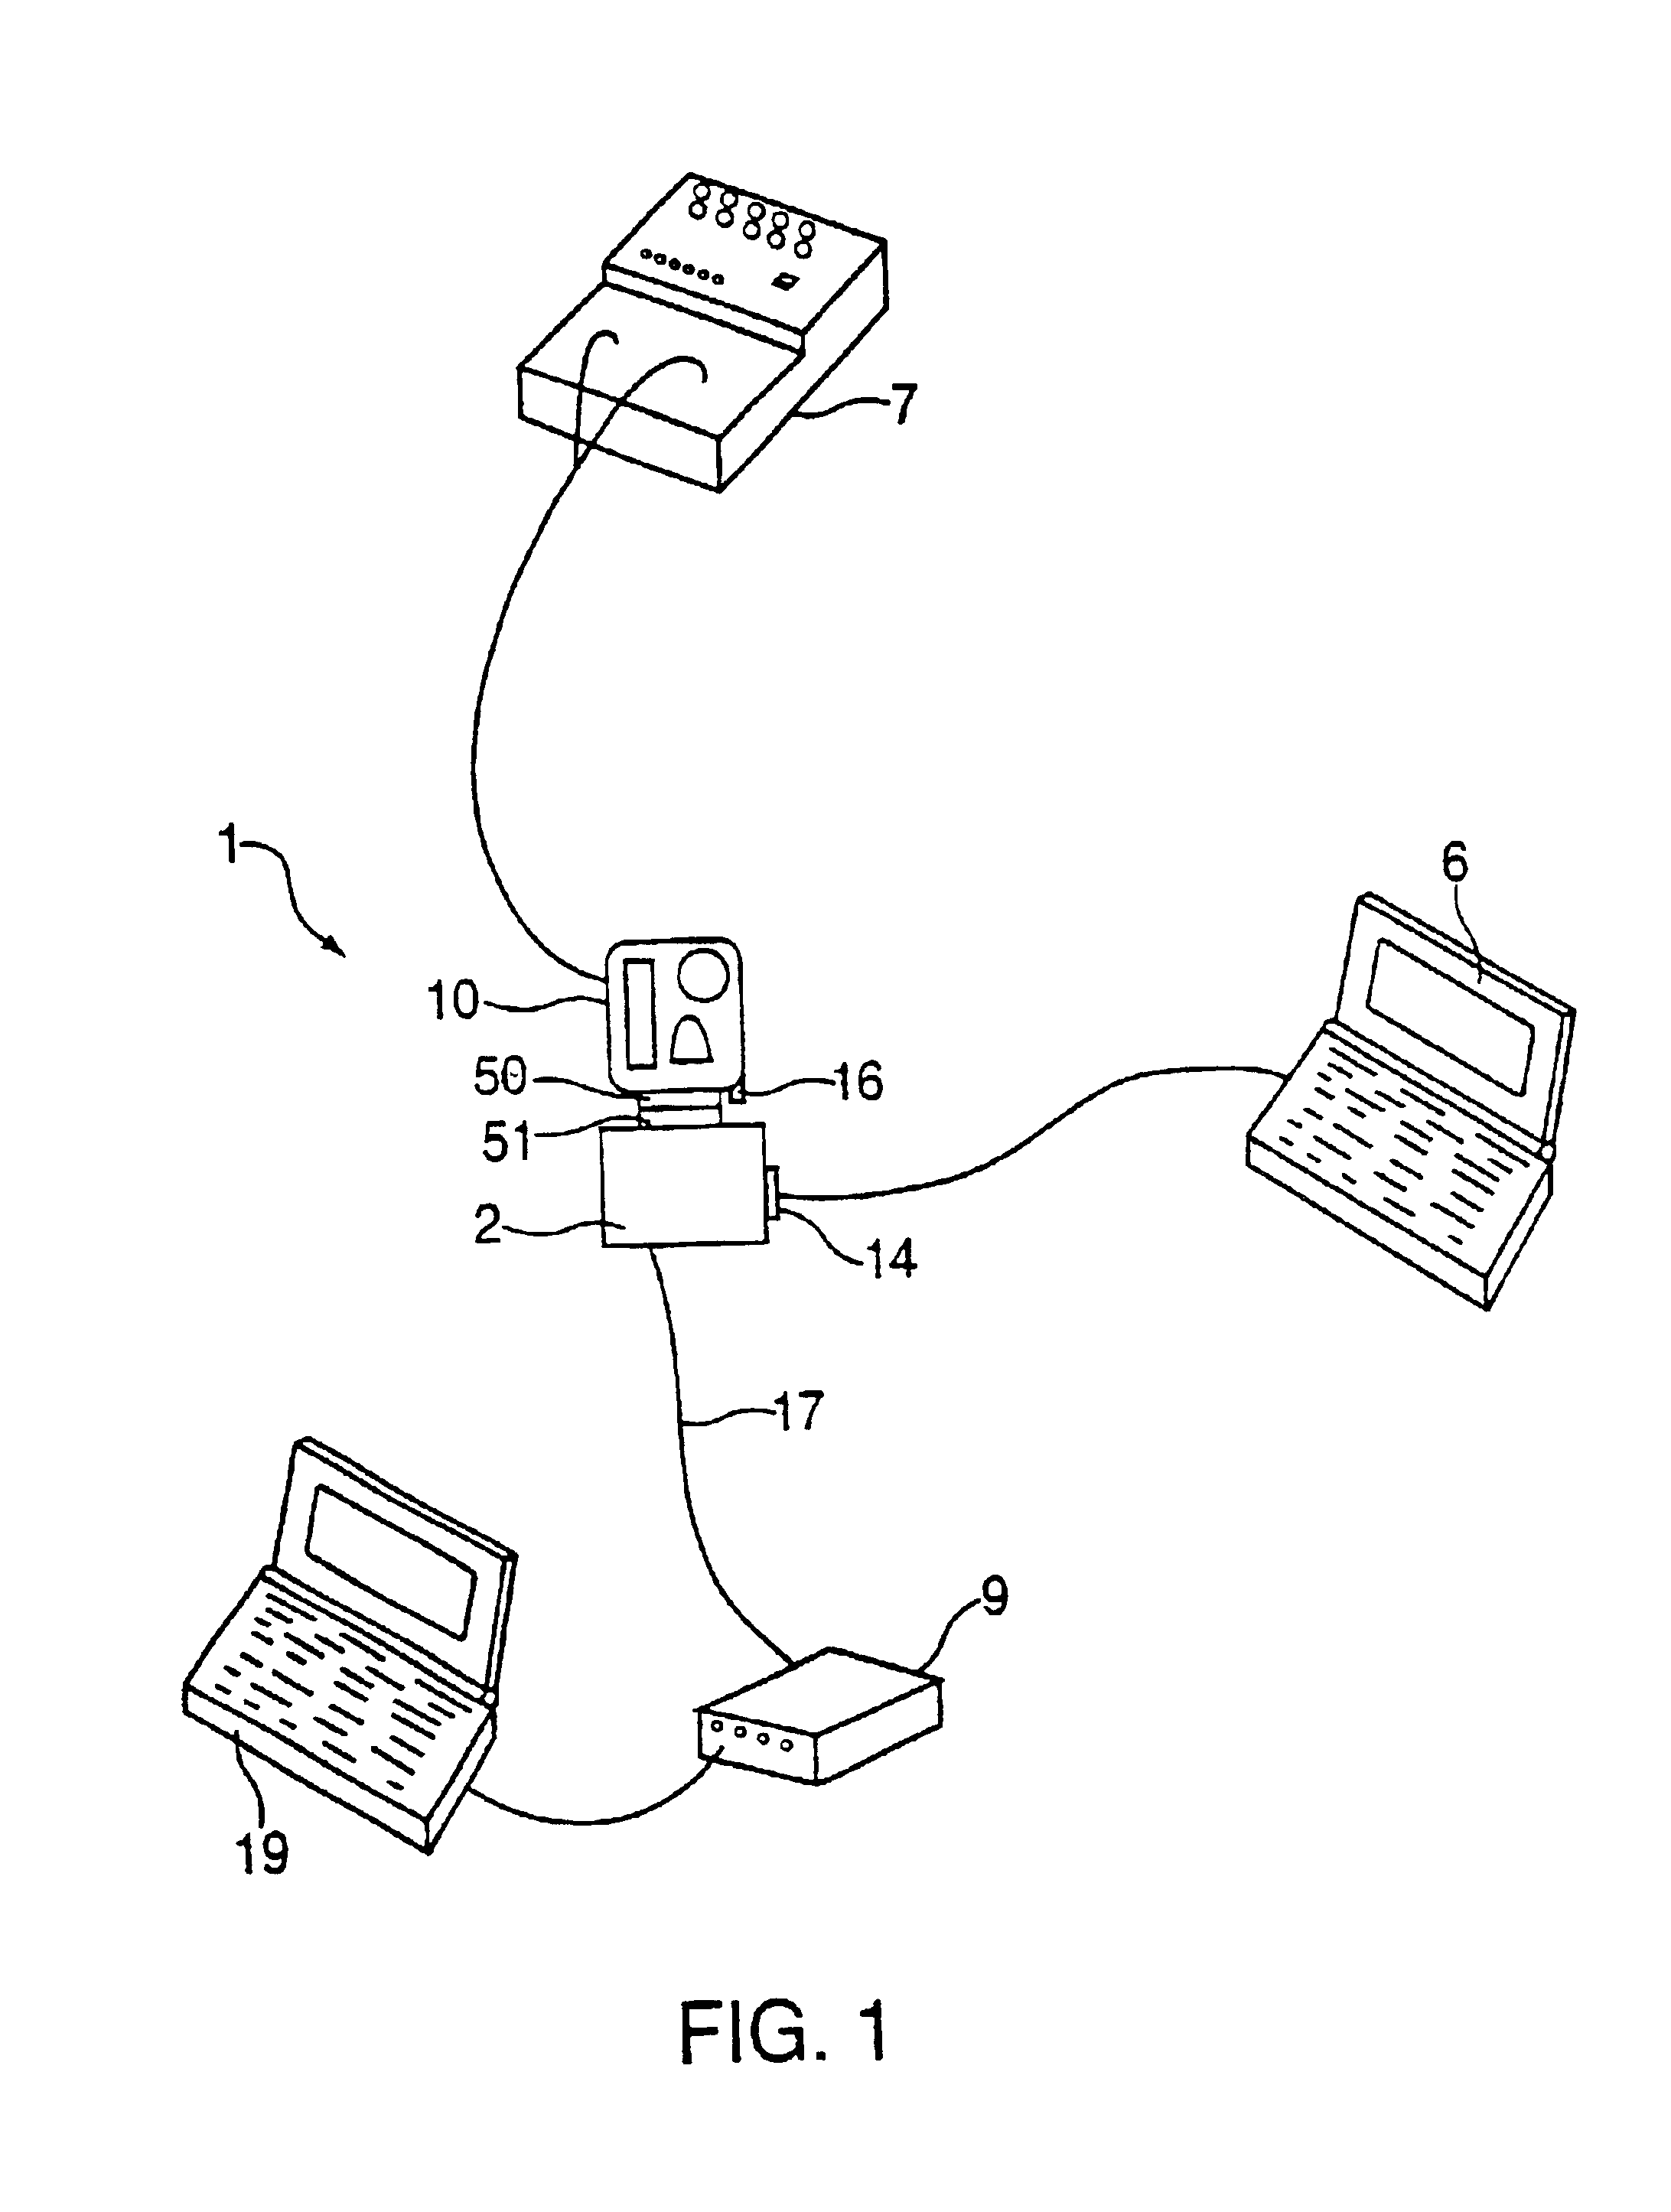 Method of utilizing an external defibrillator by replacing its electrodes